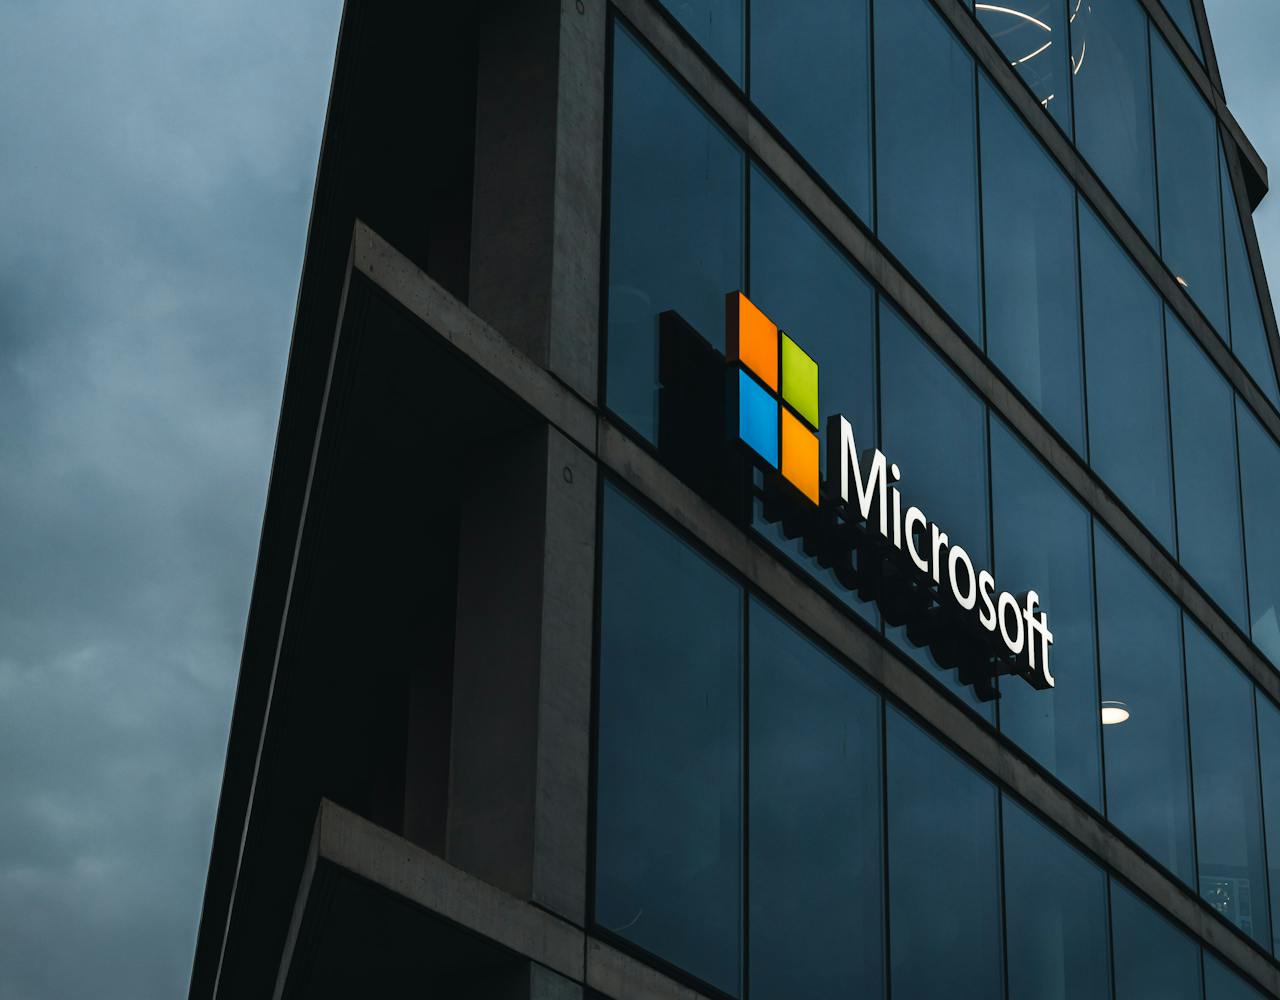 Microsoft details update on Russian-sponsored “ongoing attack”